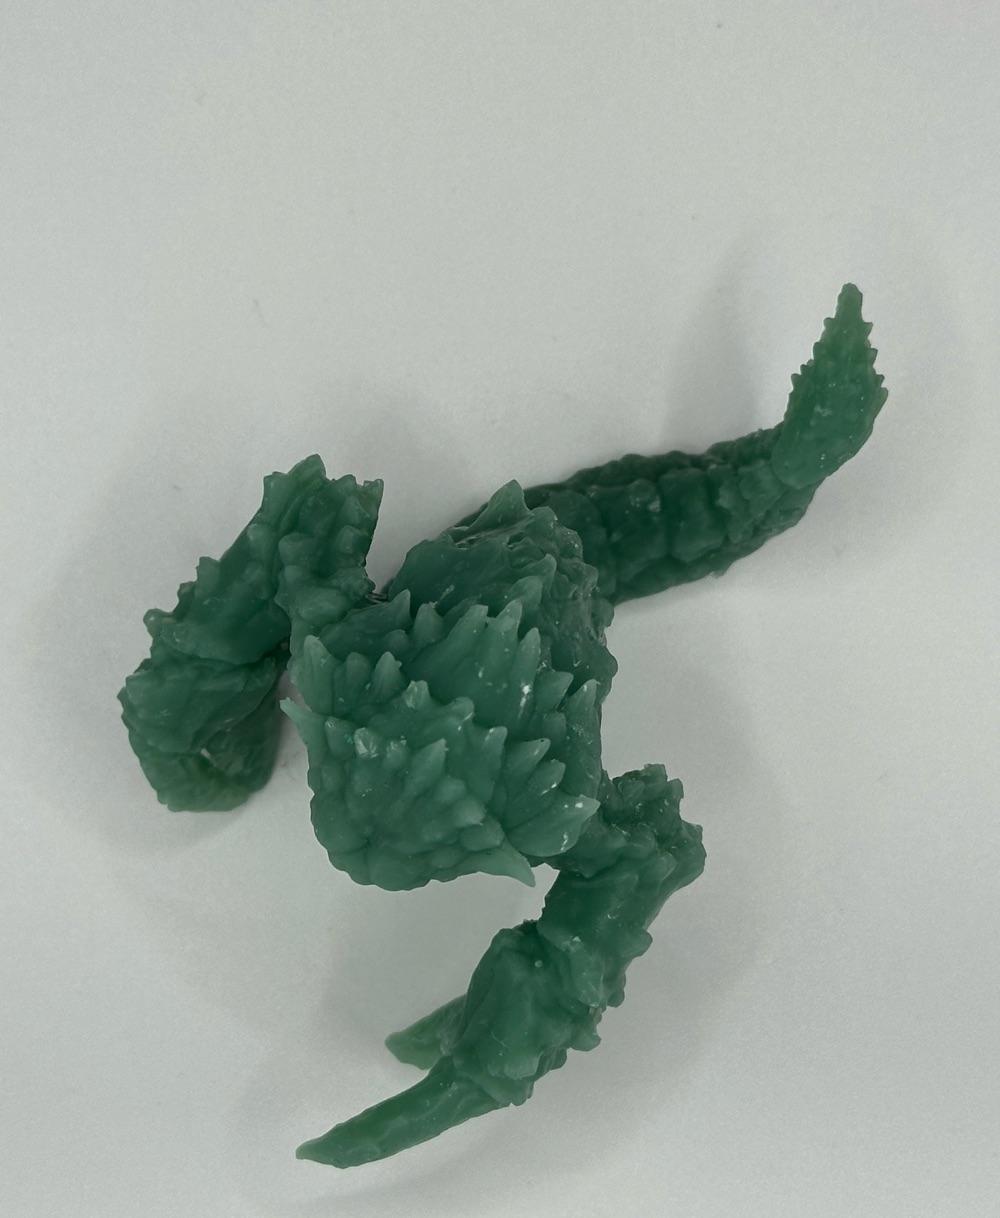 Astral Dreadnorght - Monsters of the Multiverse PRESUPPORTED - Illustrated and Stats - 32mm scale			 - Anycubic Photon Mono 6ks scaled down to 40% of original full size mix of translucent green and gray basic Anycubic resins - 3d model